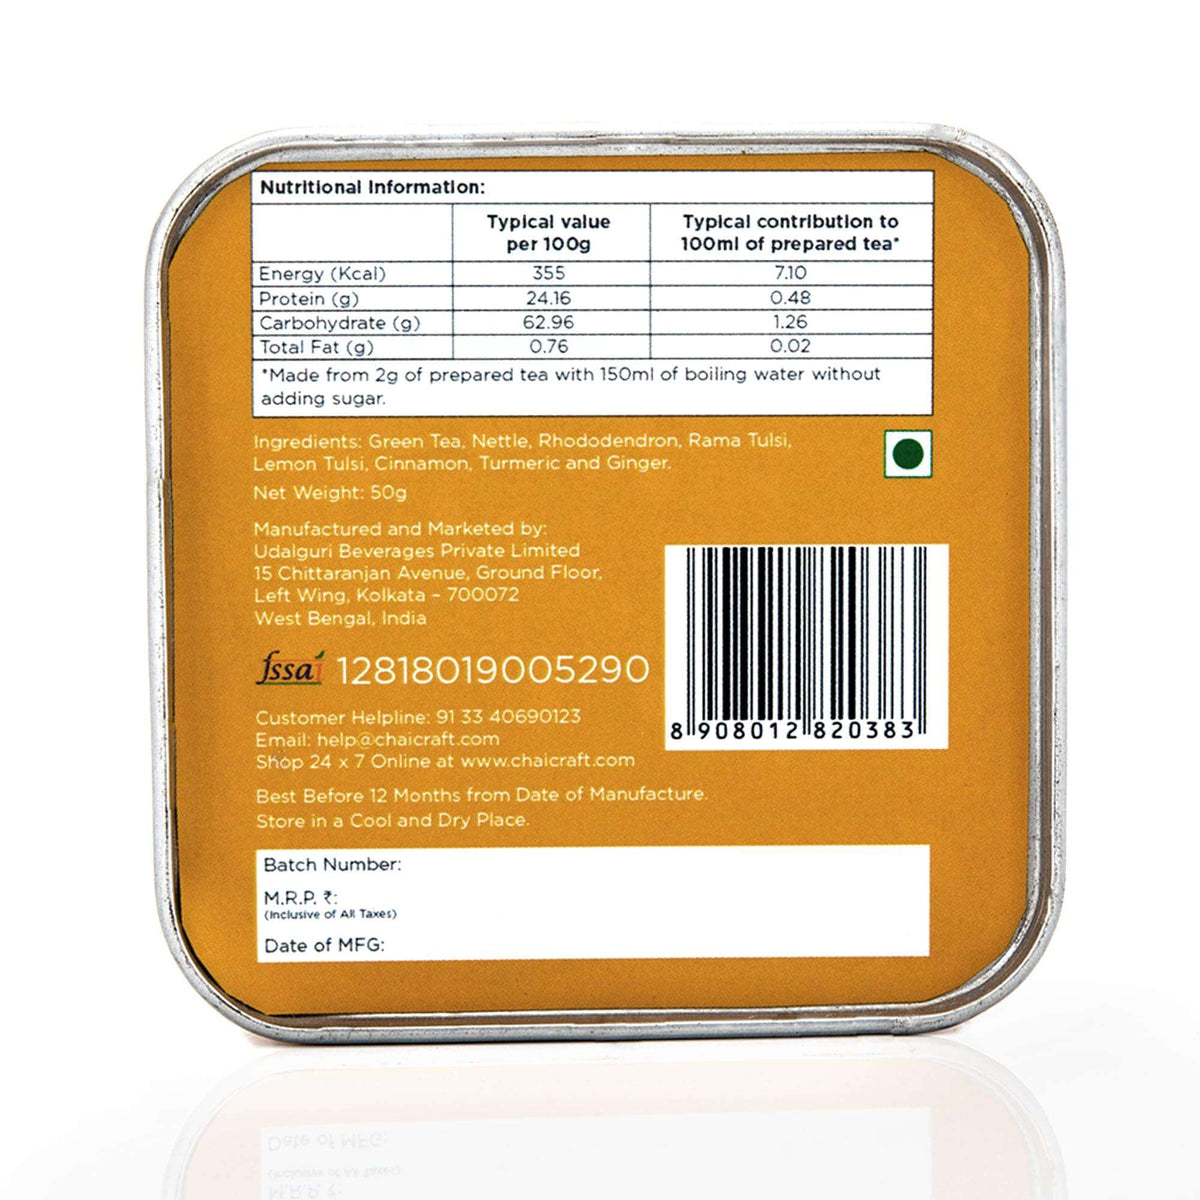 Anti Inflammatory Tea Pain Check bottom with nutritional information price and barcode 